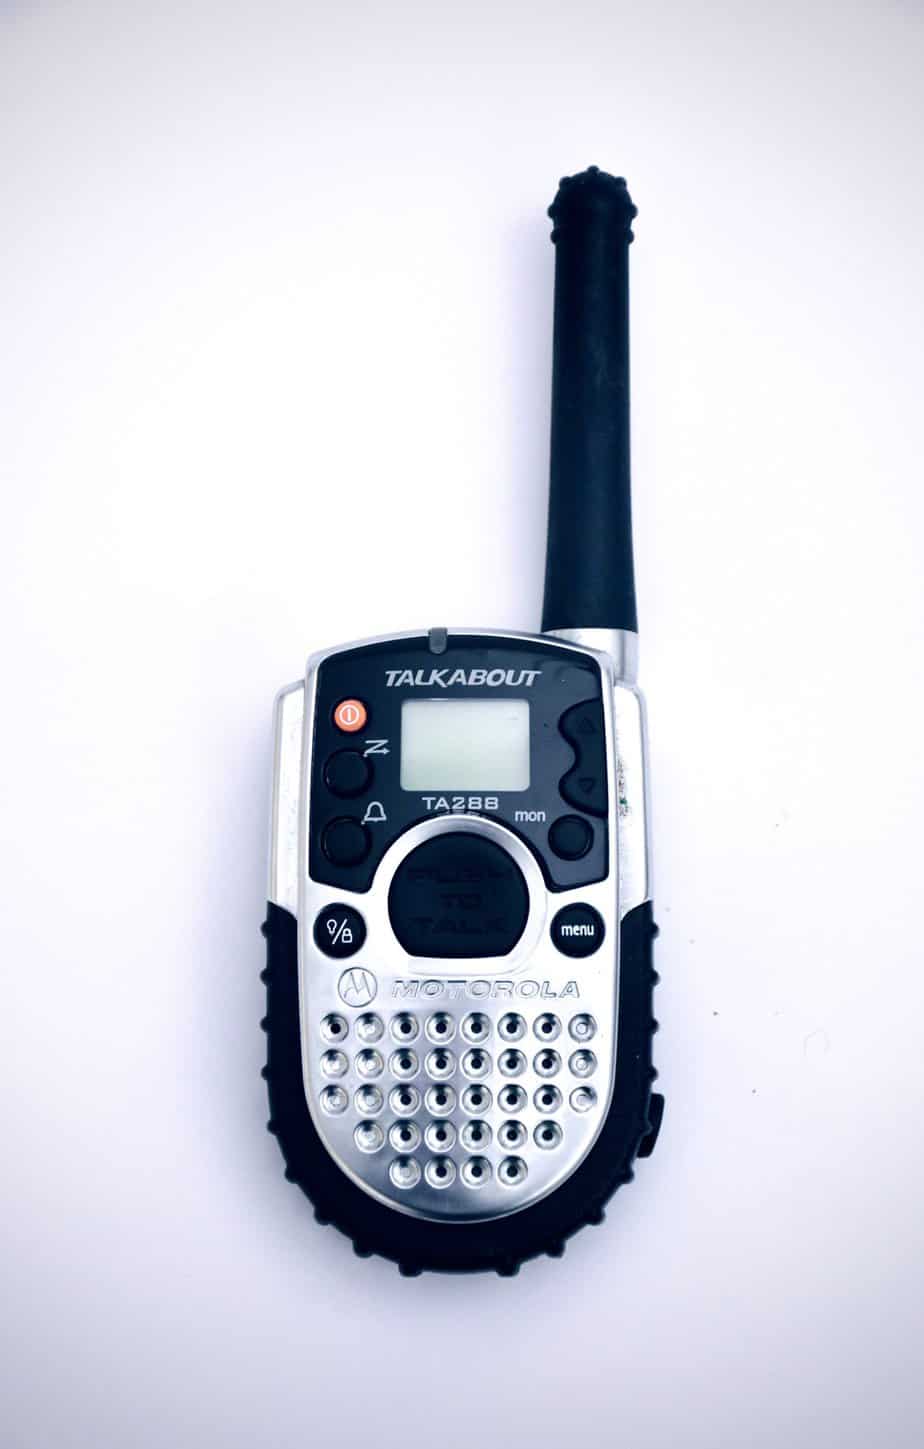 What are radio communication devices and how they are beneficial